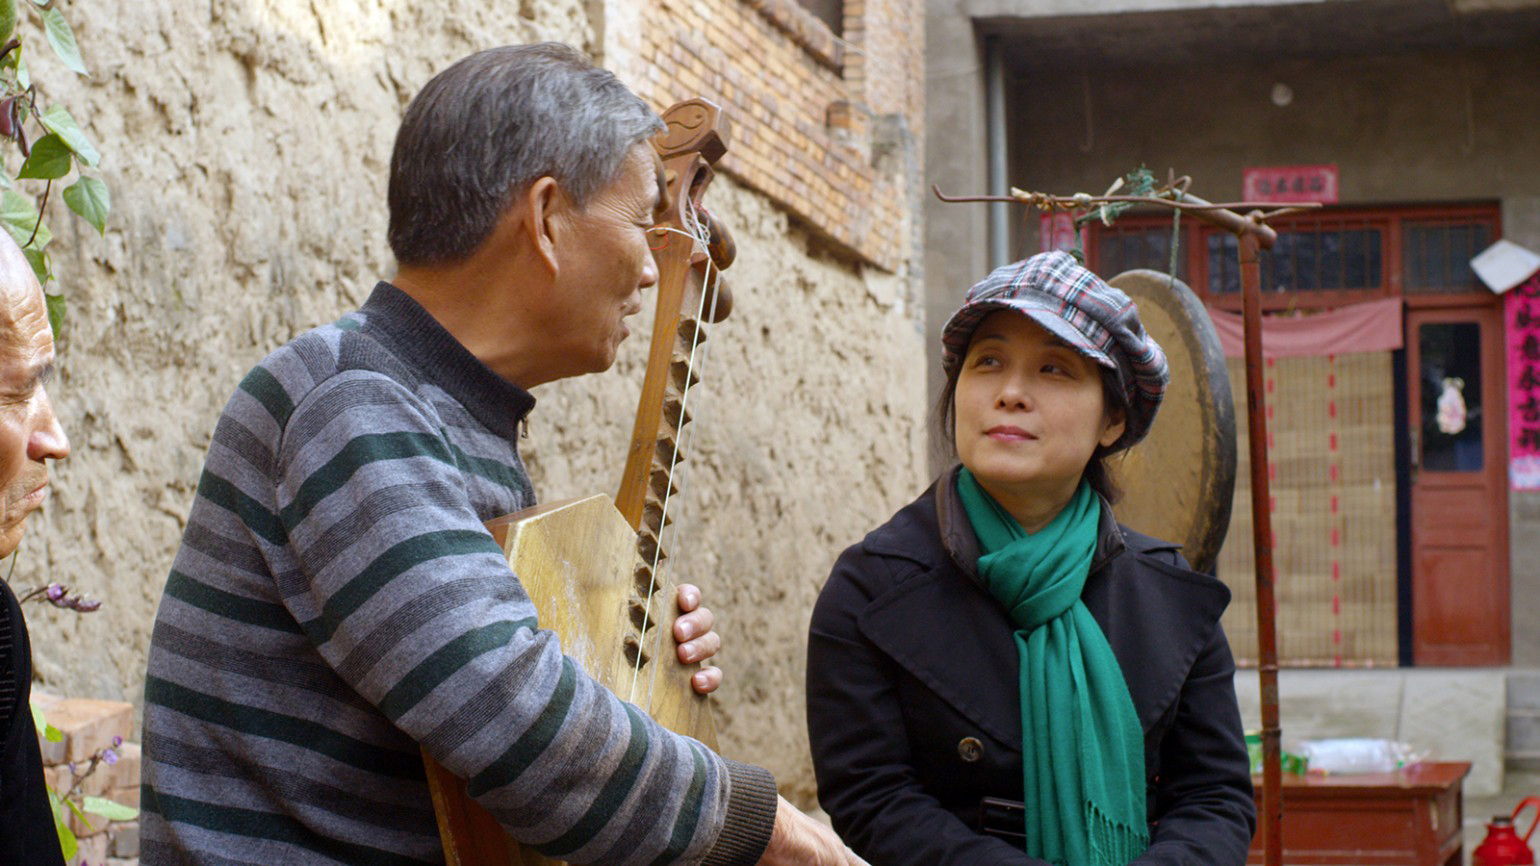 “The Music of Strangers” takes a look at musician Yo-Yo Ma’s Silk Road Project. It’s an uplifting documentary — perhaps a bit too uplifting.